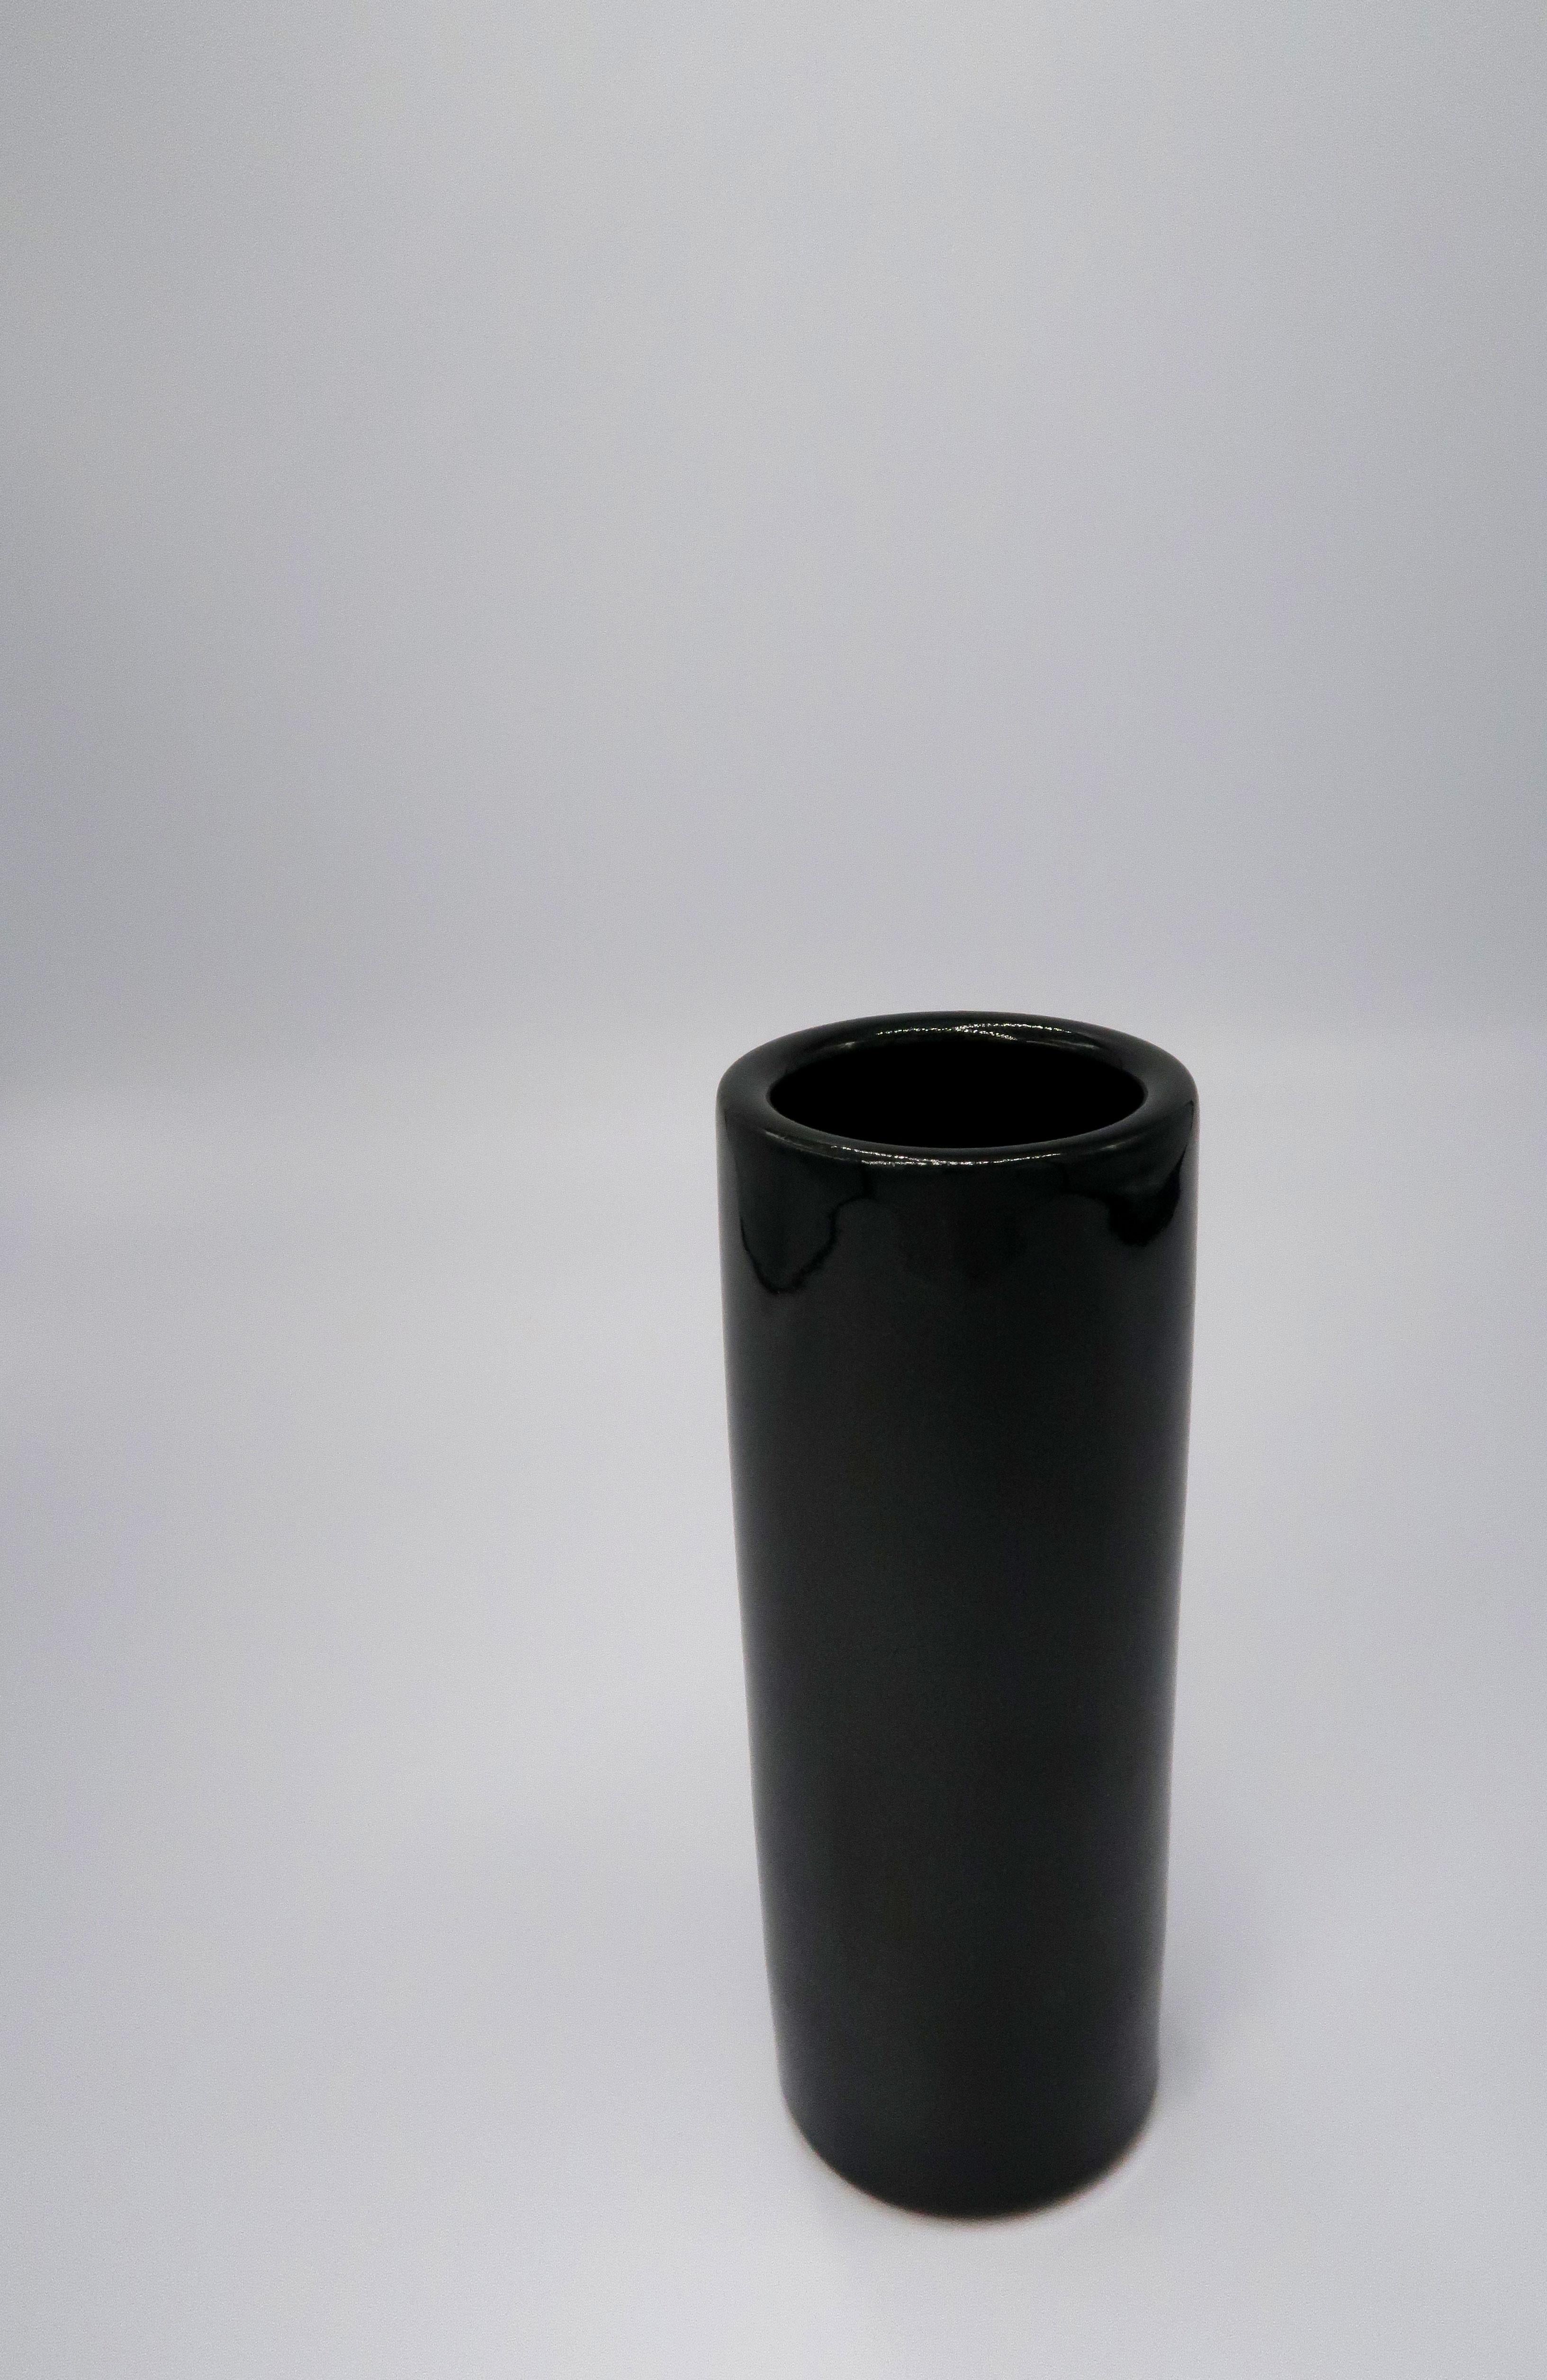 Classic and simplistic tubular handmade ceramic Scandinavian midcentury modern vase with shiny black glaze on the exterior and interior. Manufactured on the small Danish of Bornholm by Søholm in the 1960s. Model 3731-3. Stamped on the bottom on